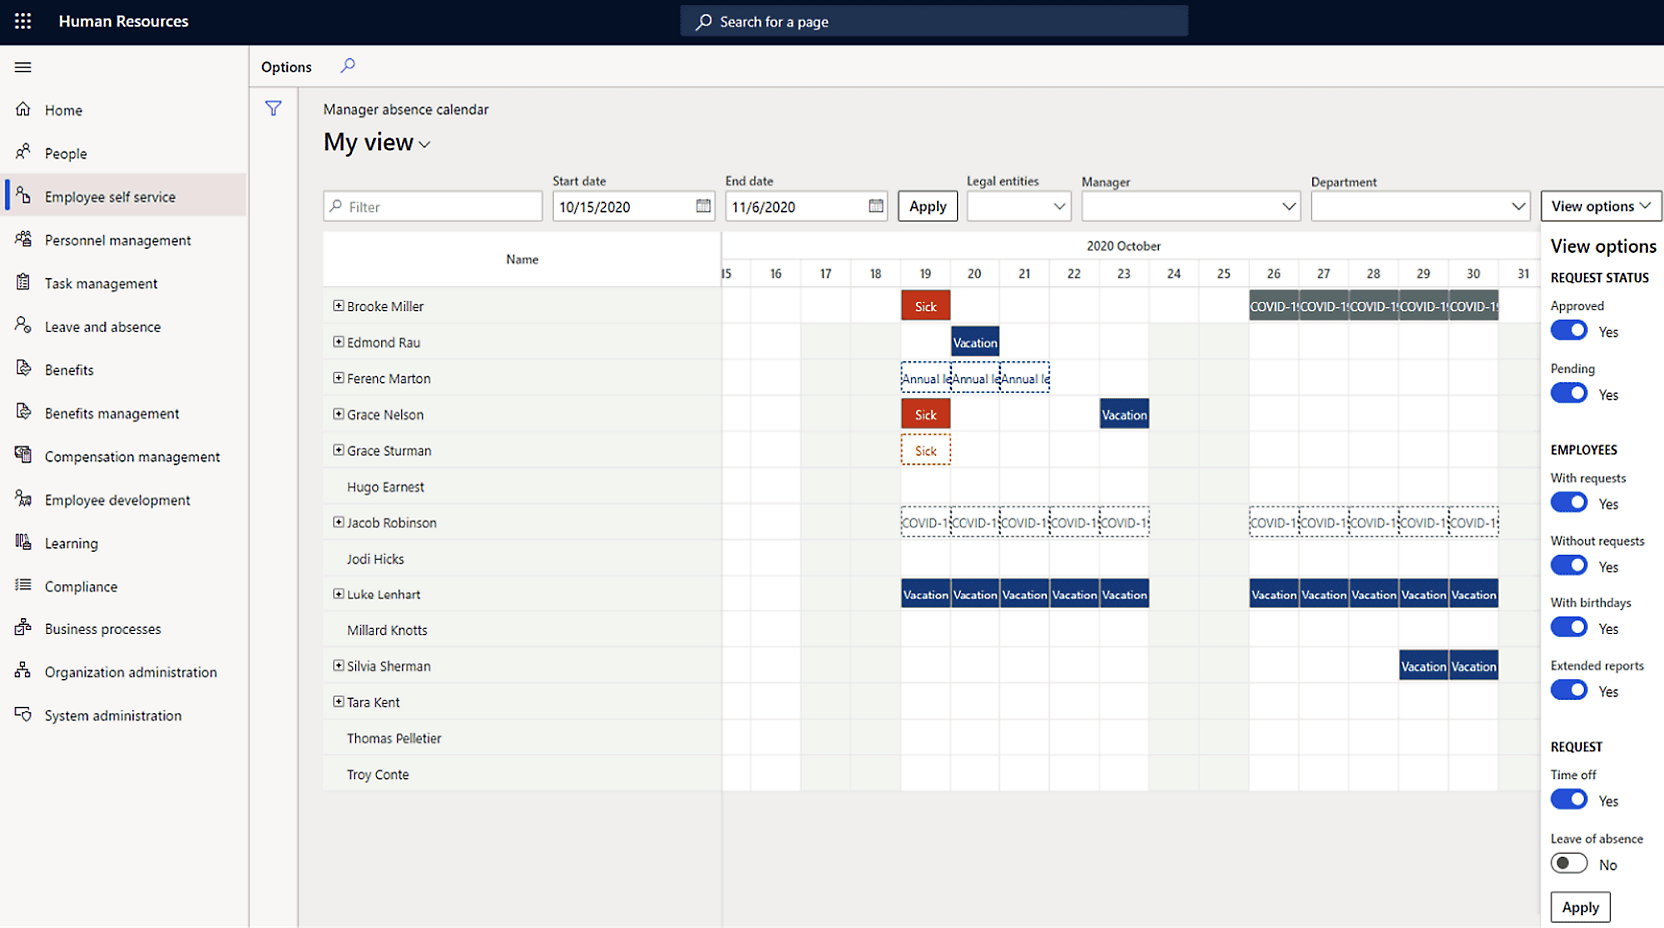 A managerial absence calendar interface shows employee leave status, date ranges, and related details. 